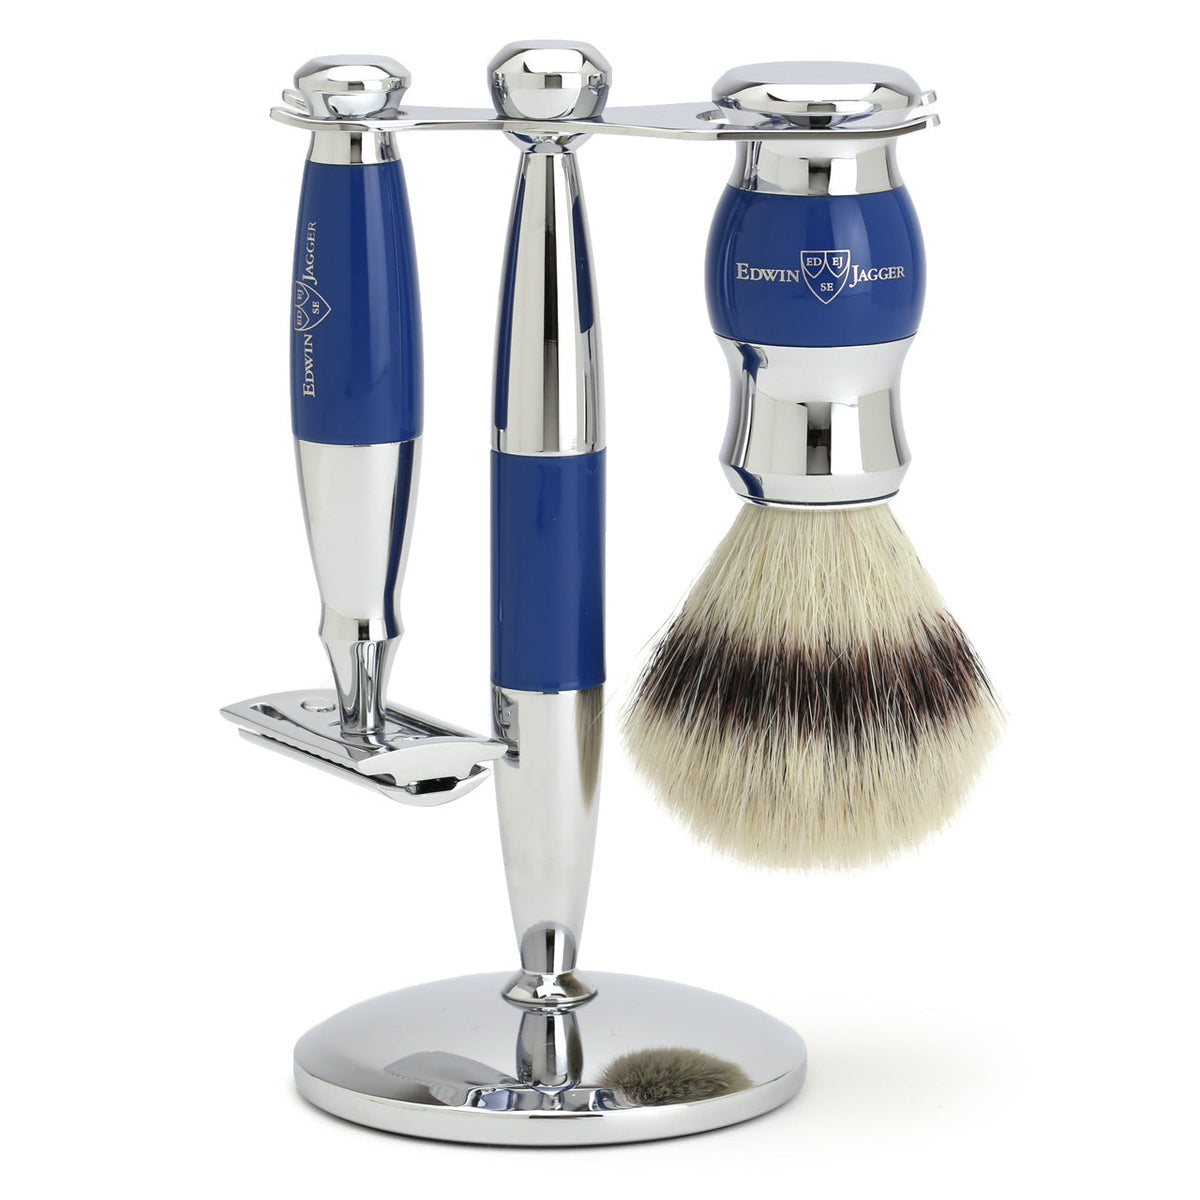 Edwin Jagger Shaving Set with Safety Razor, Shaving Brush and Stand - Blue